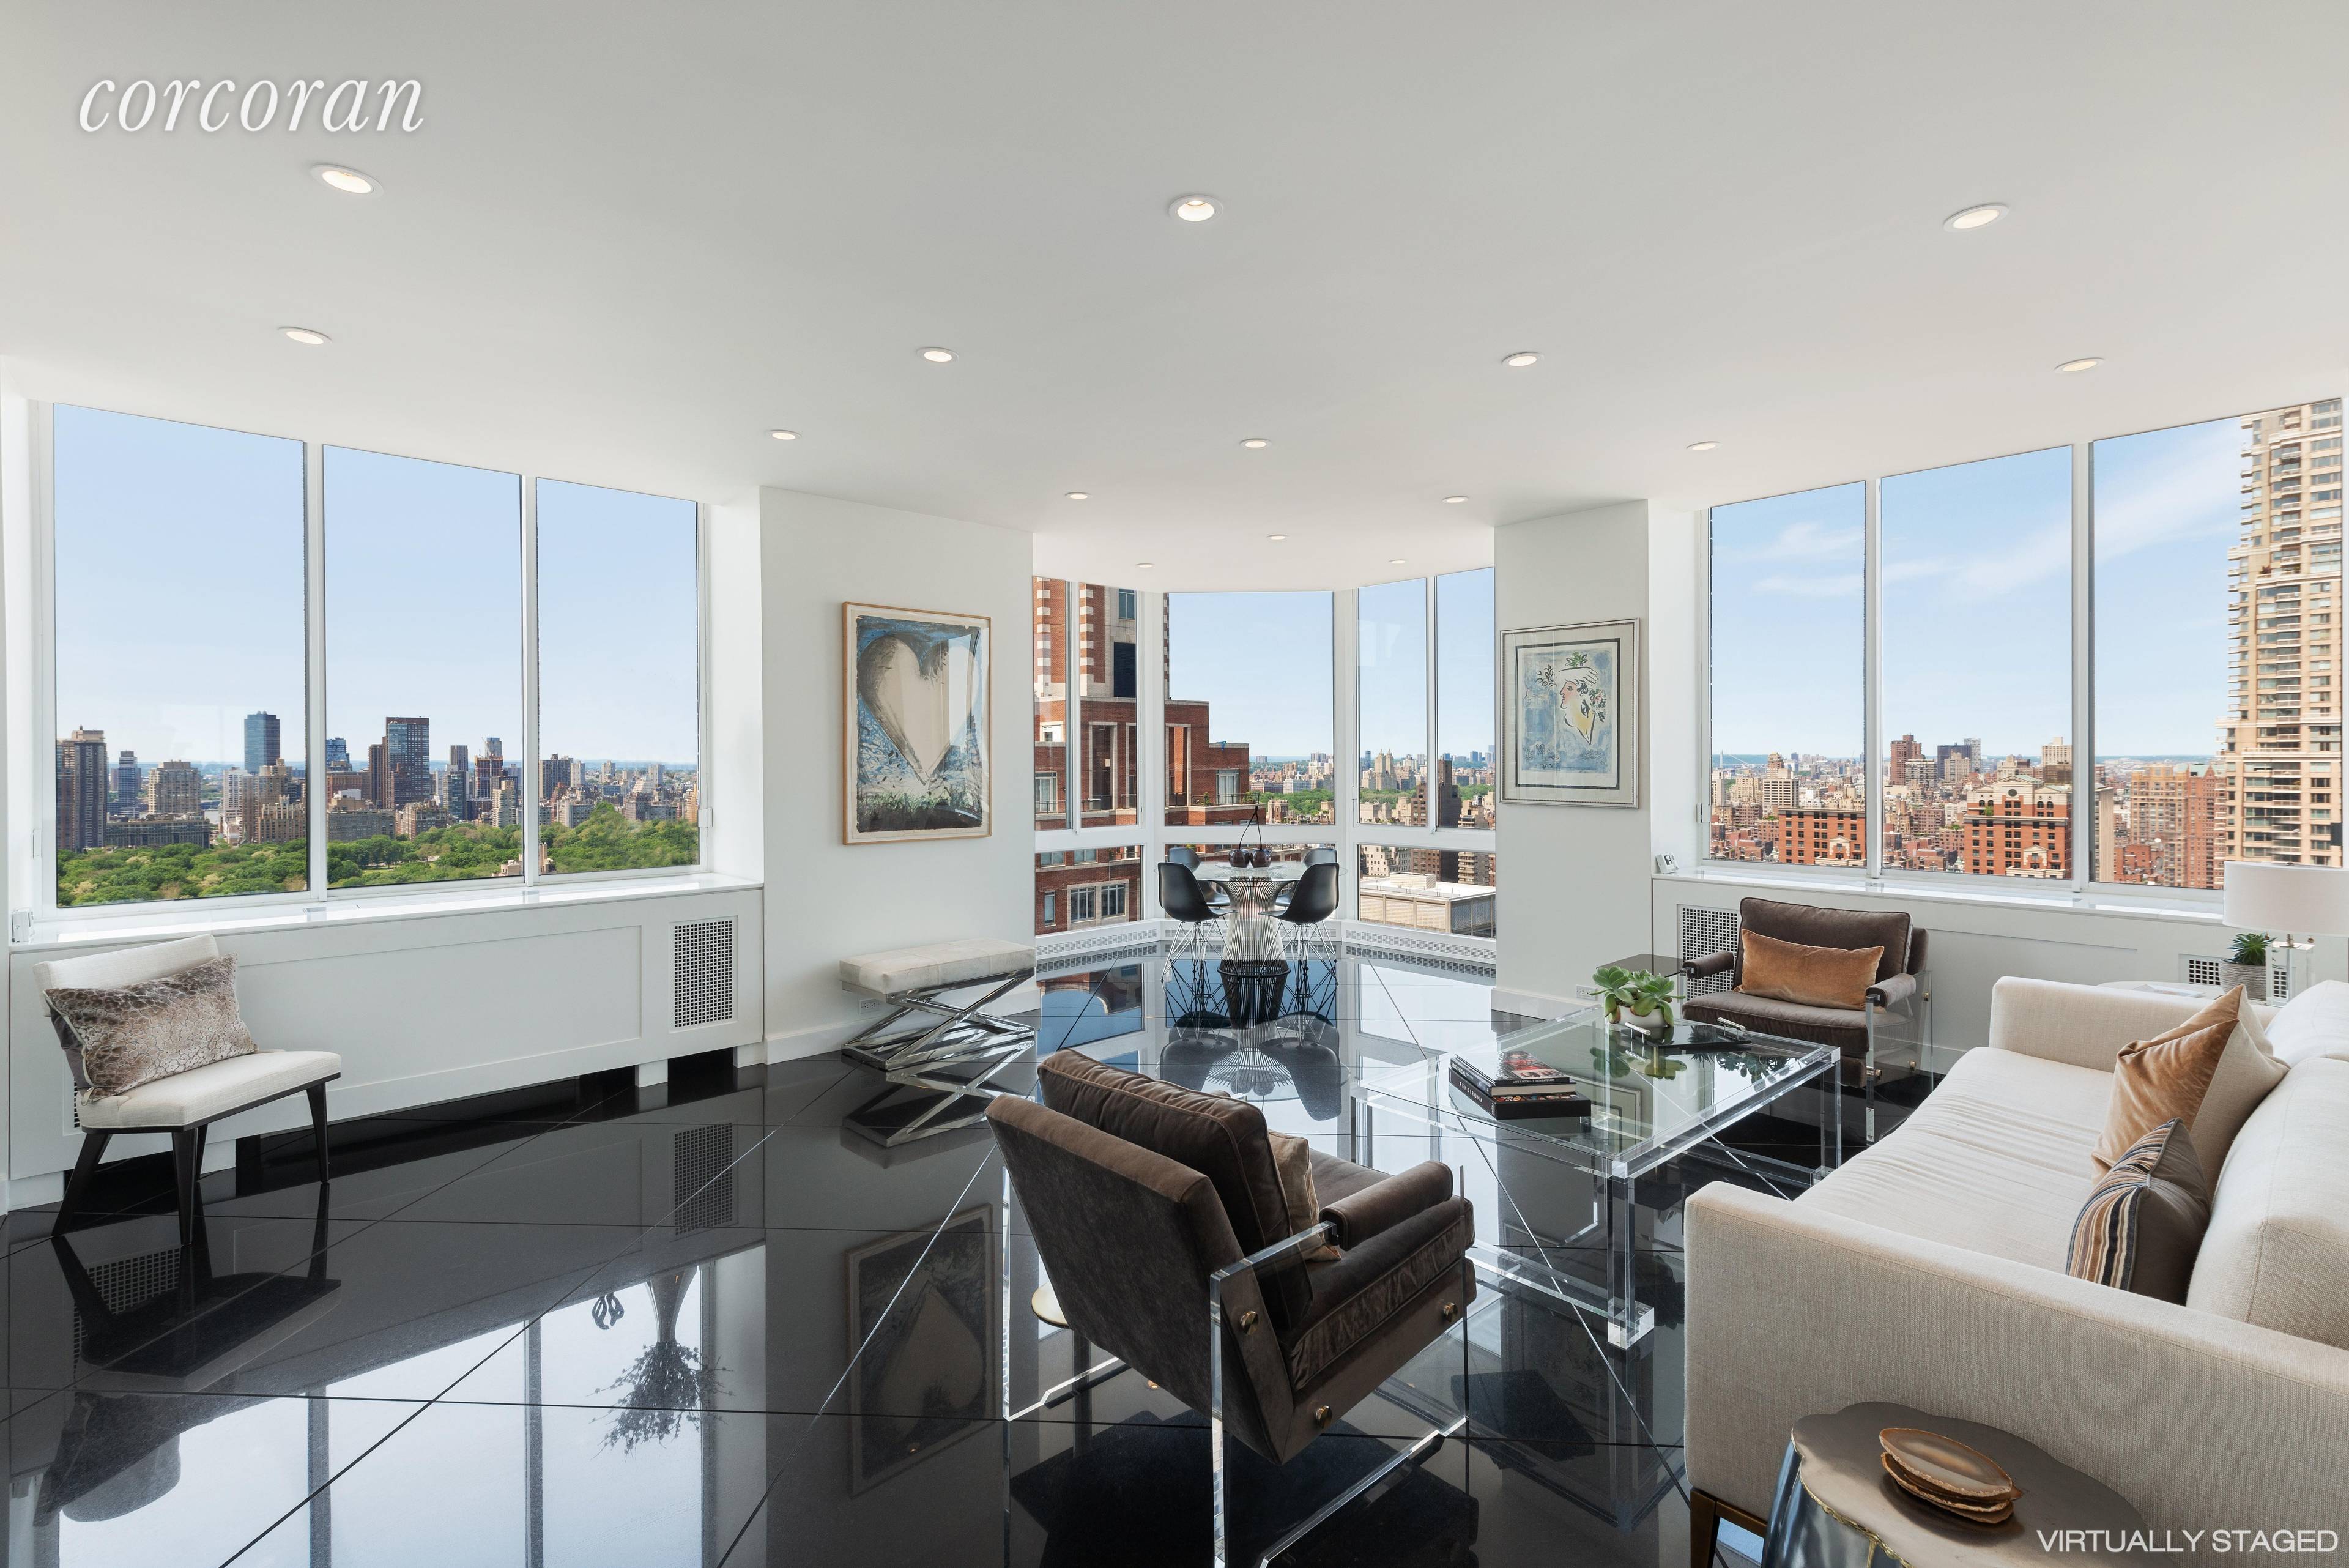 Enjoy breathtaking views from every room of this high floor residence in one of the Upper East Sides most prestigious full service condominiums.